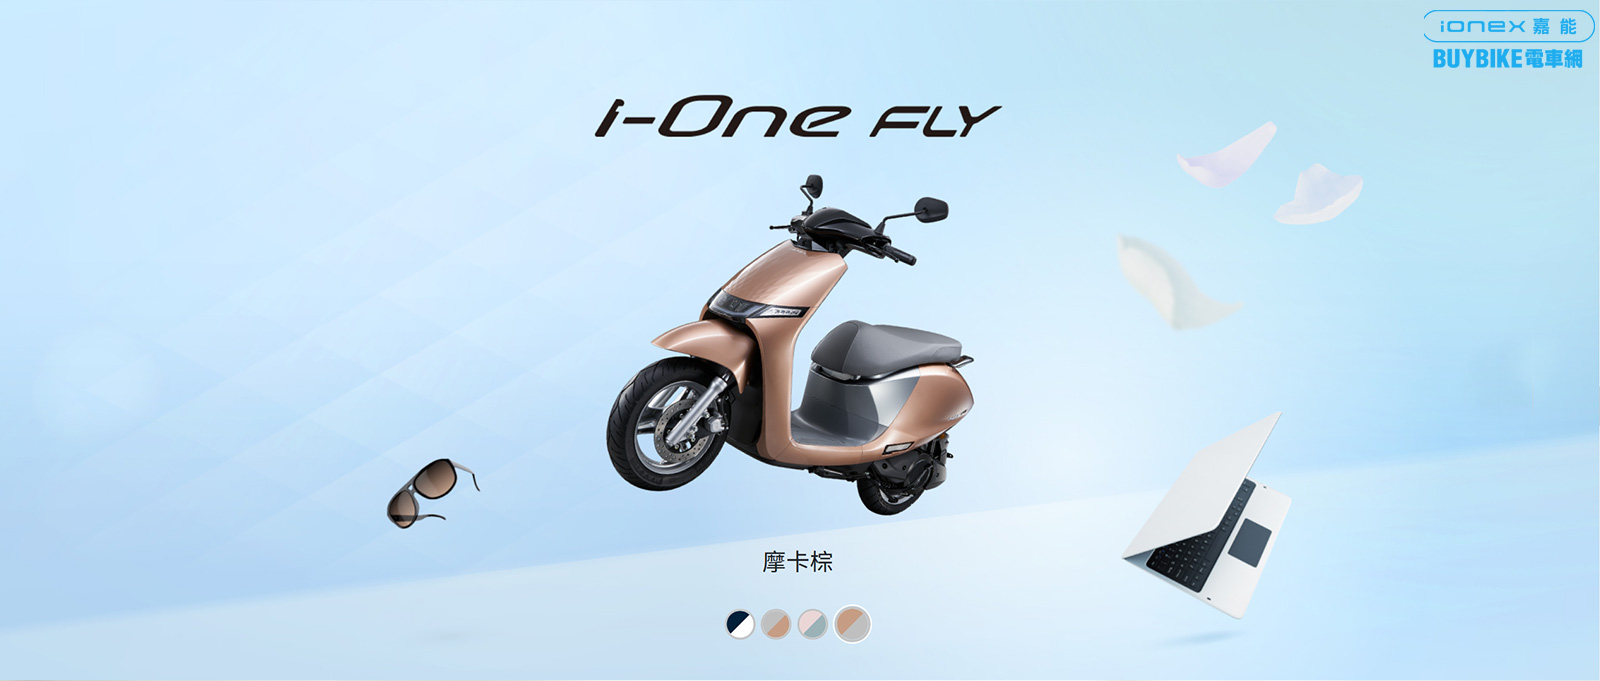 ione-fly-pic_13